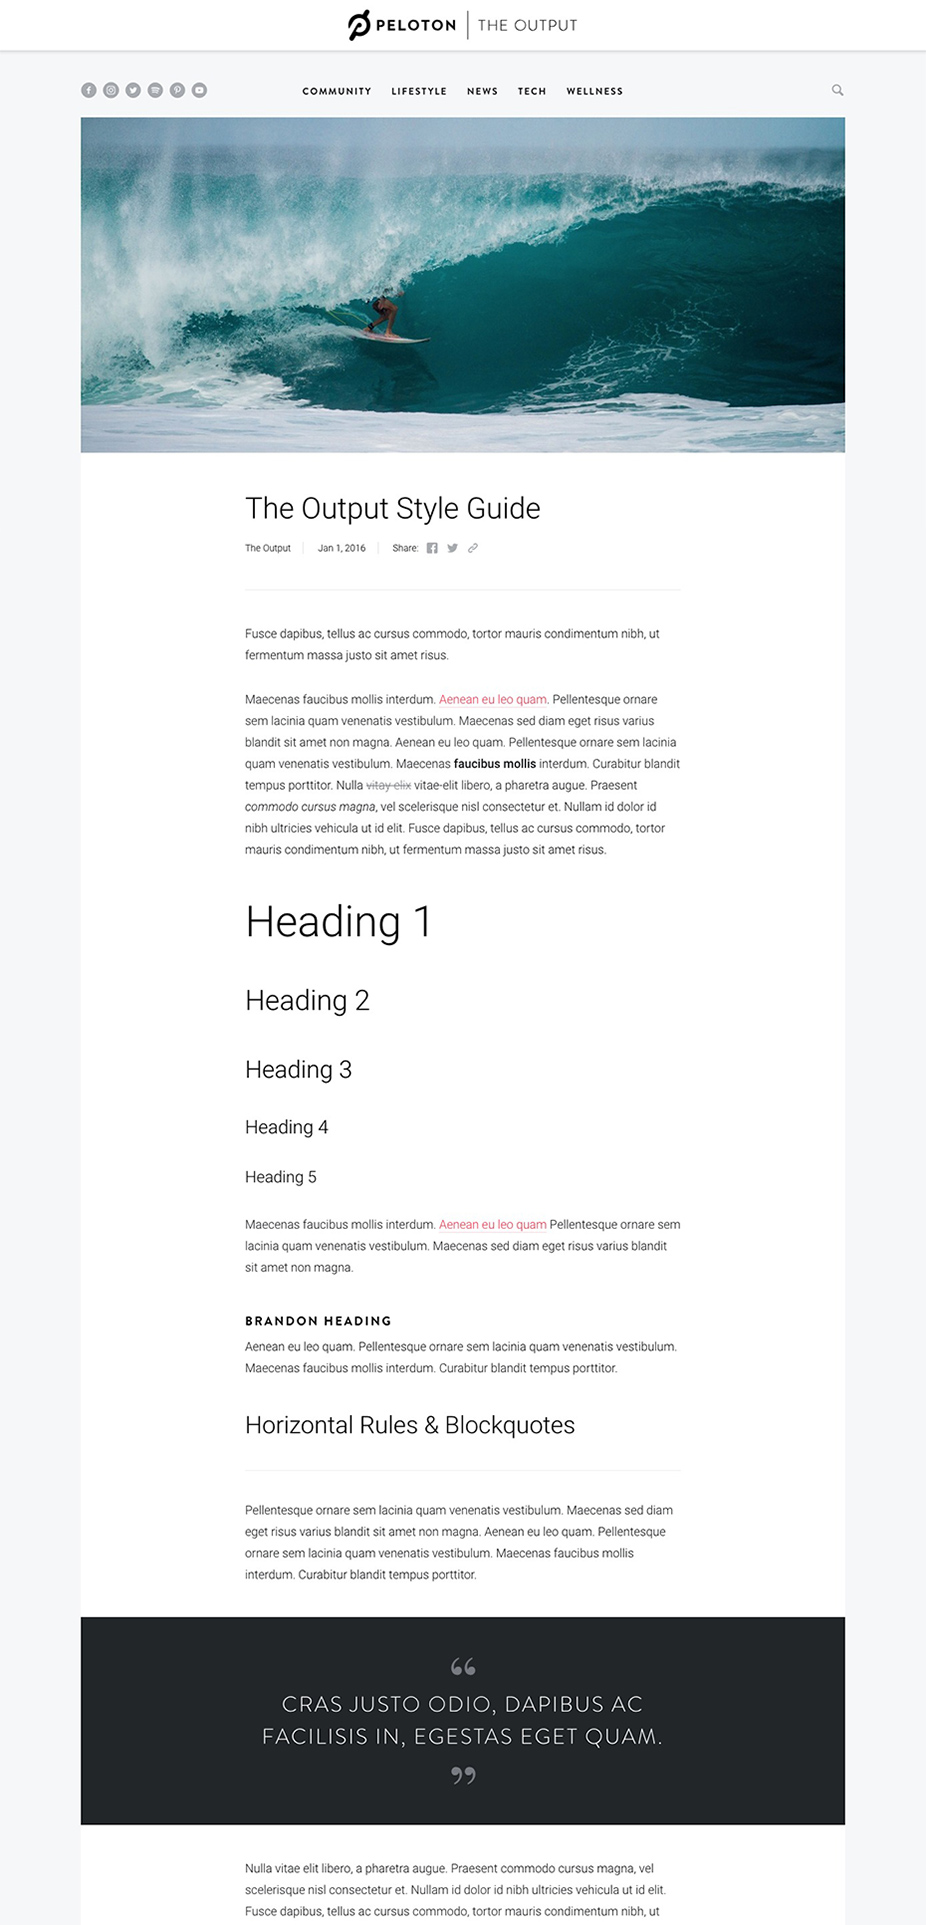 The Output Styleguide